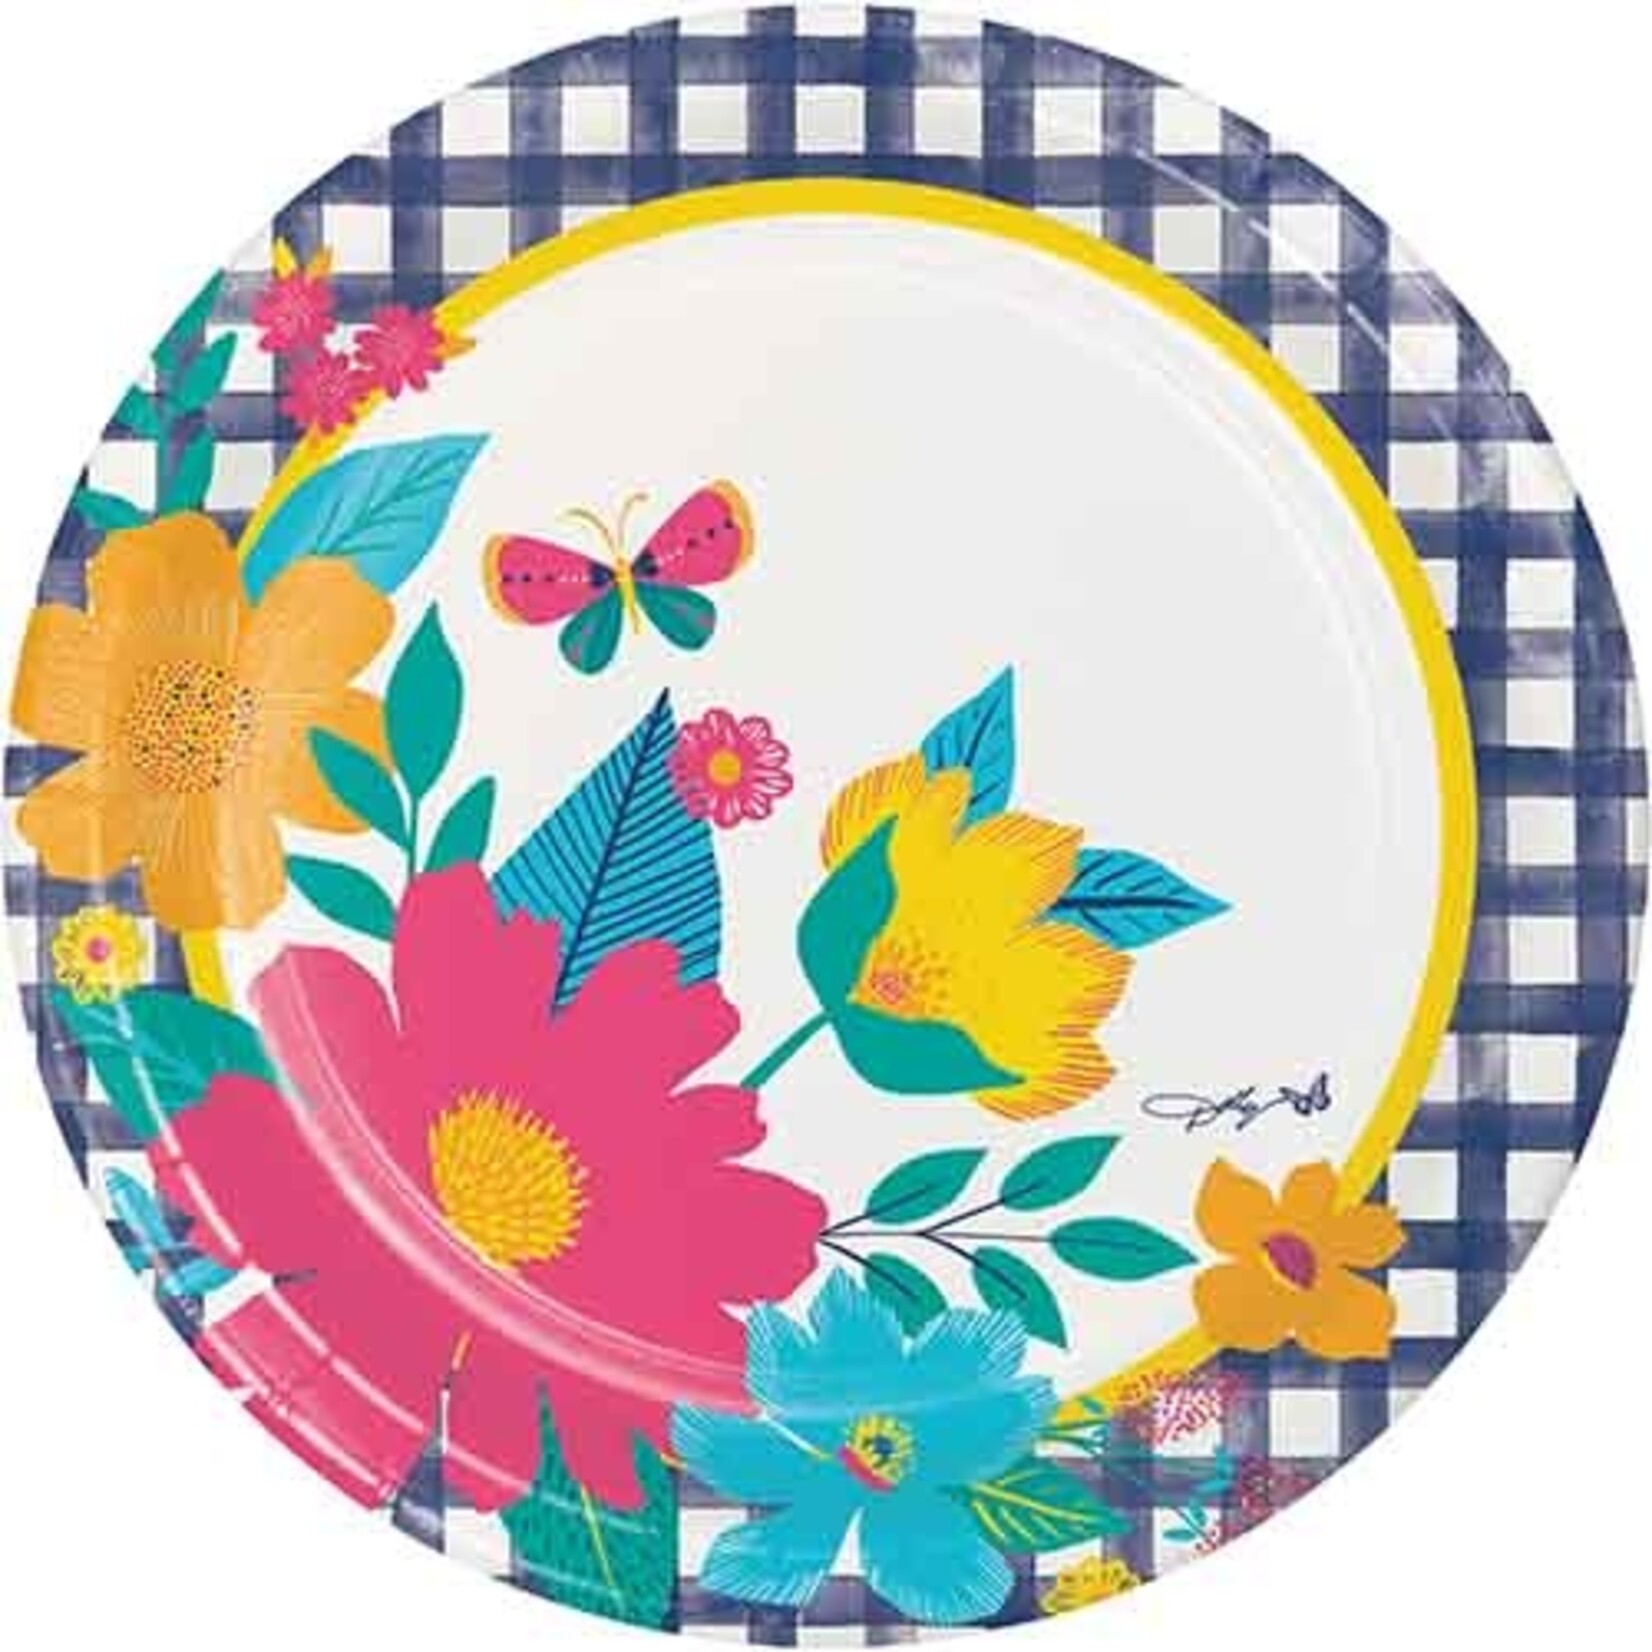 Dolly Parton 10" Blossoming Beauty Plates - 8ct.